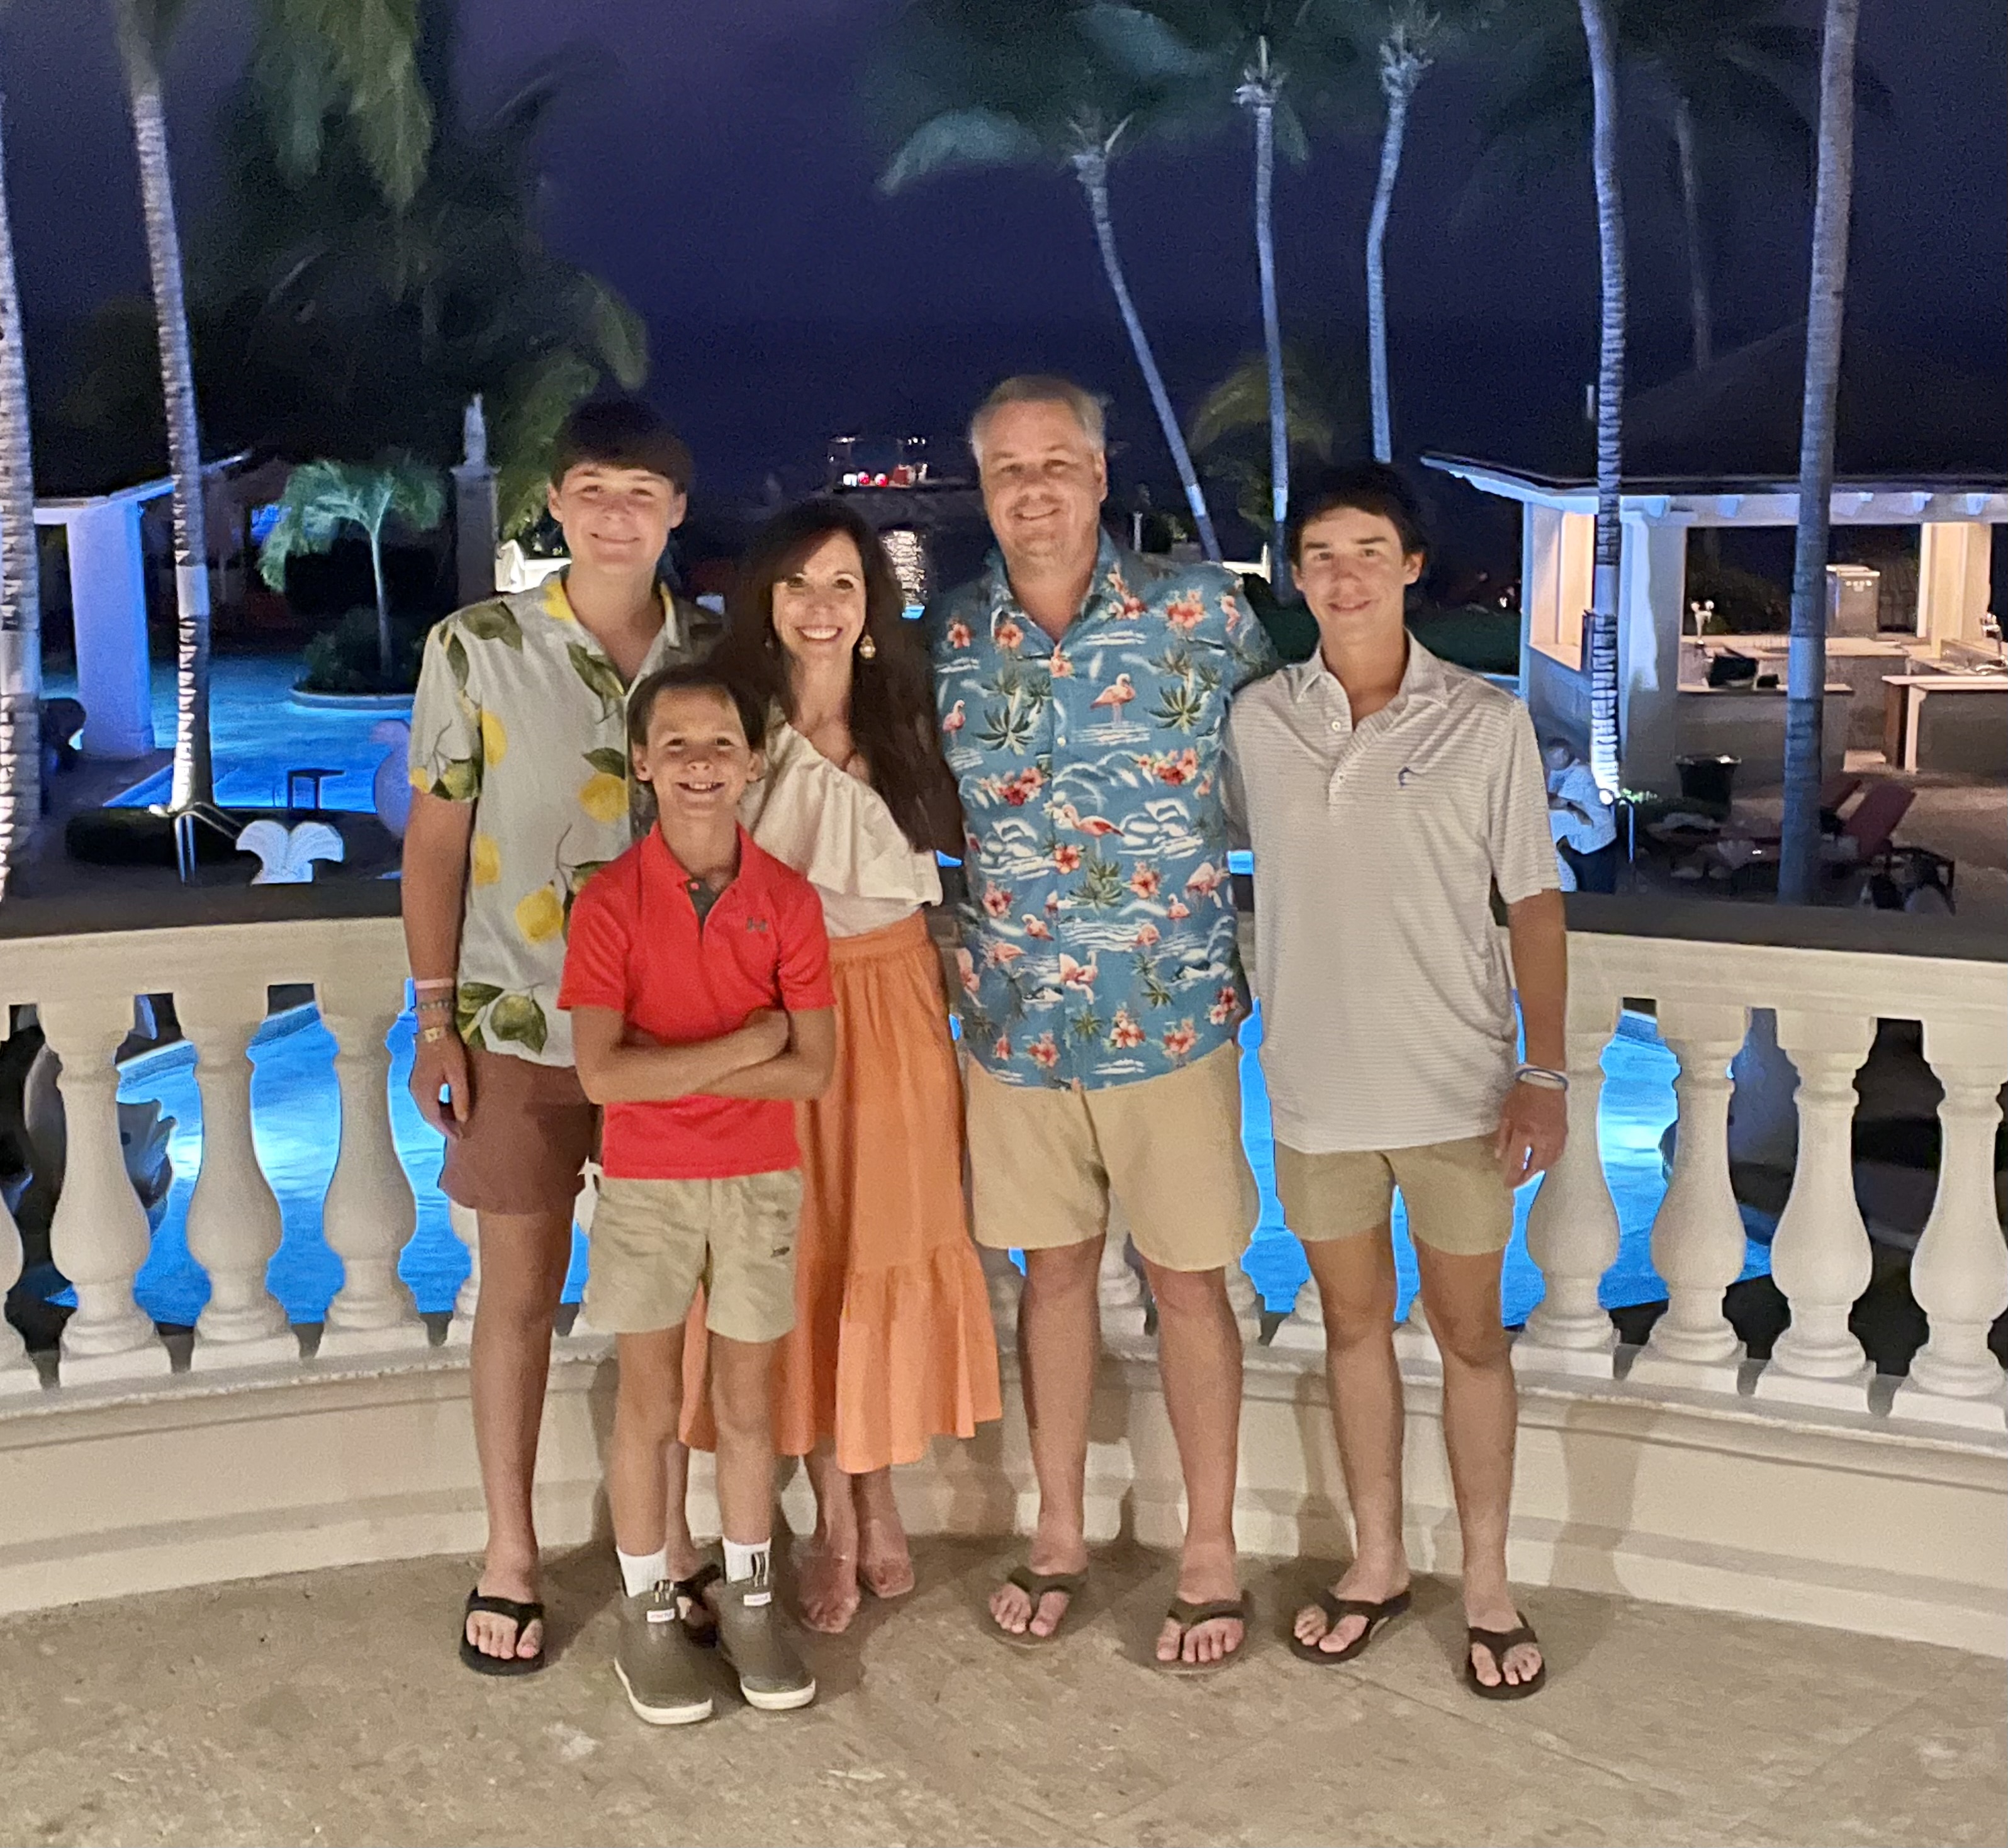 Chip Bruorton with his wife, Lindsay, and their three sons -- Lyles, Gracen and Carver — on vacation.